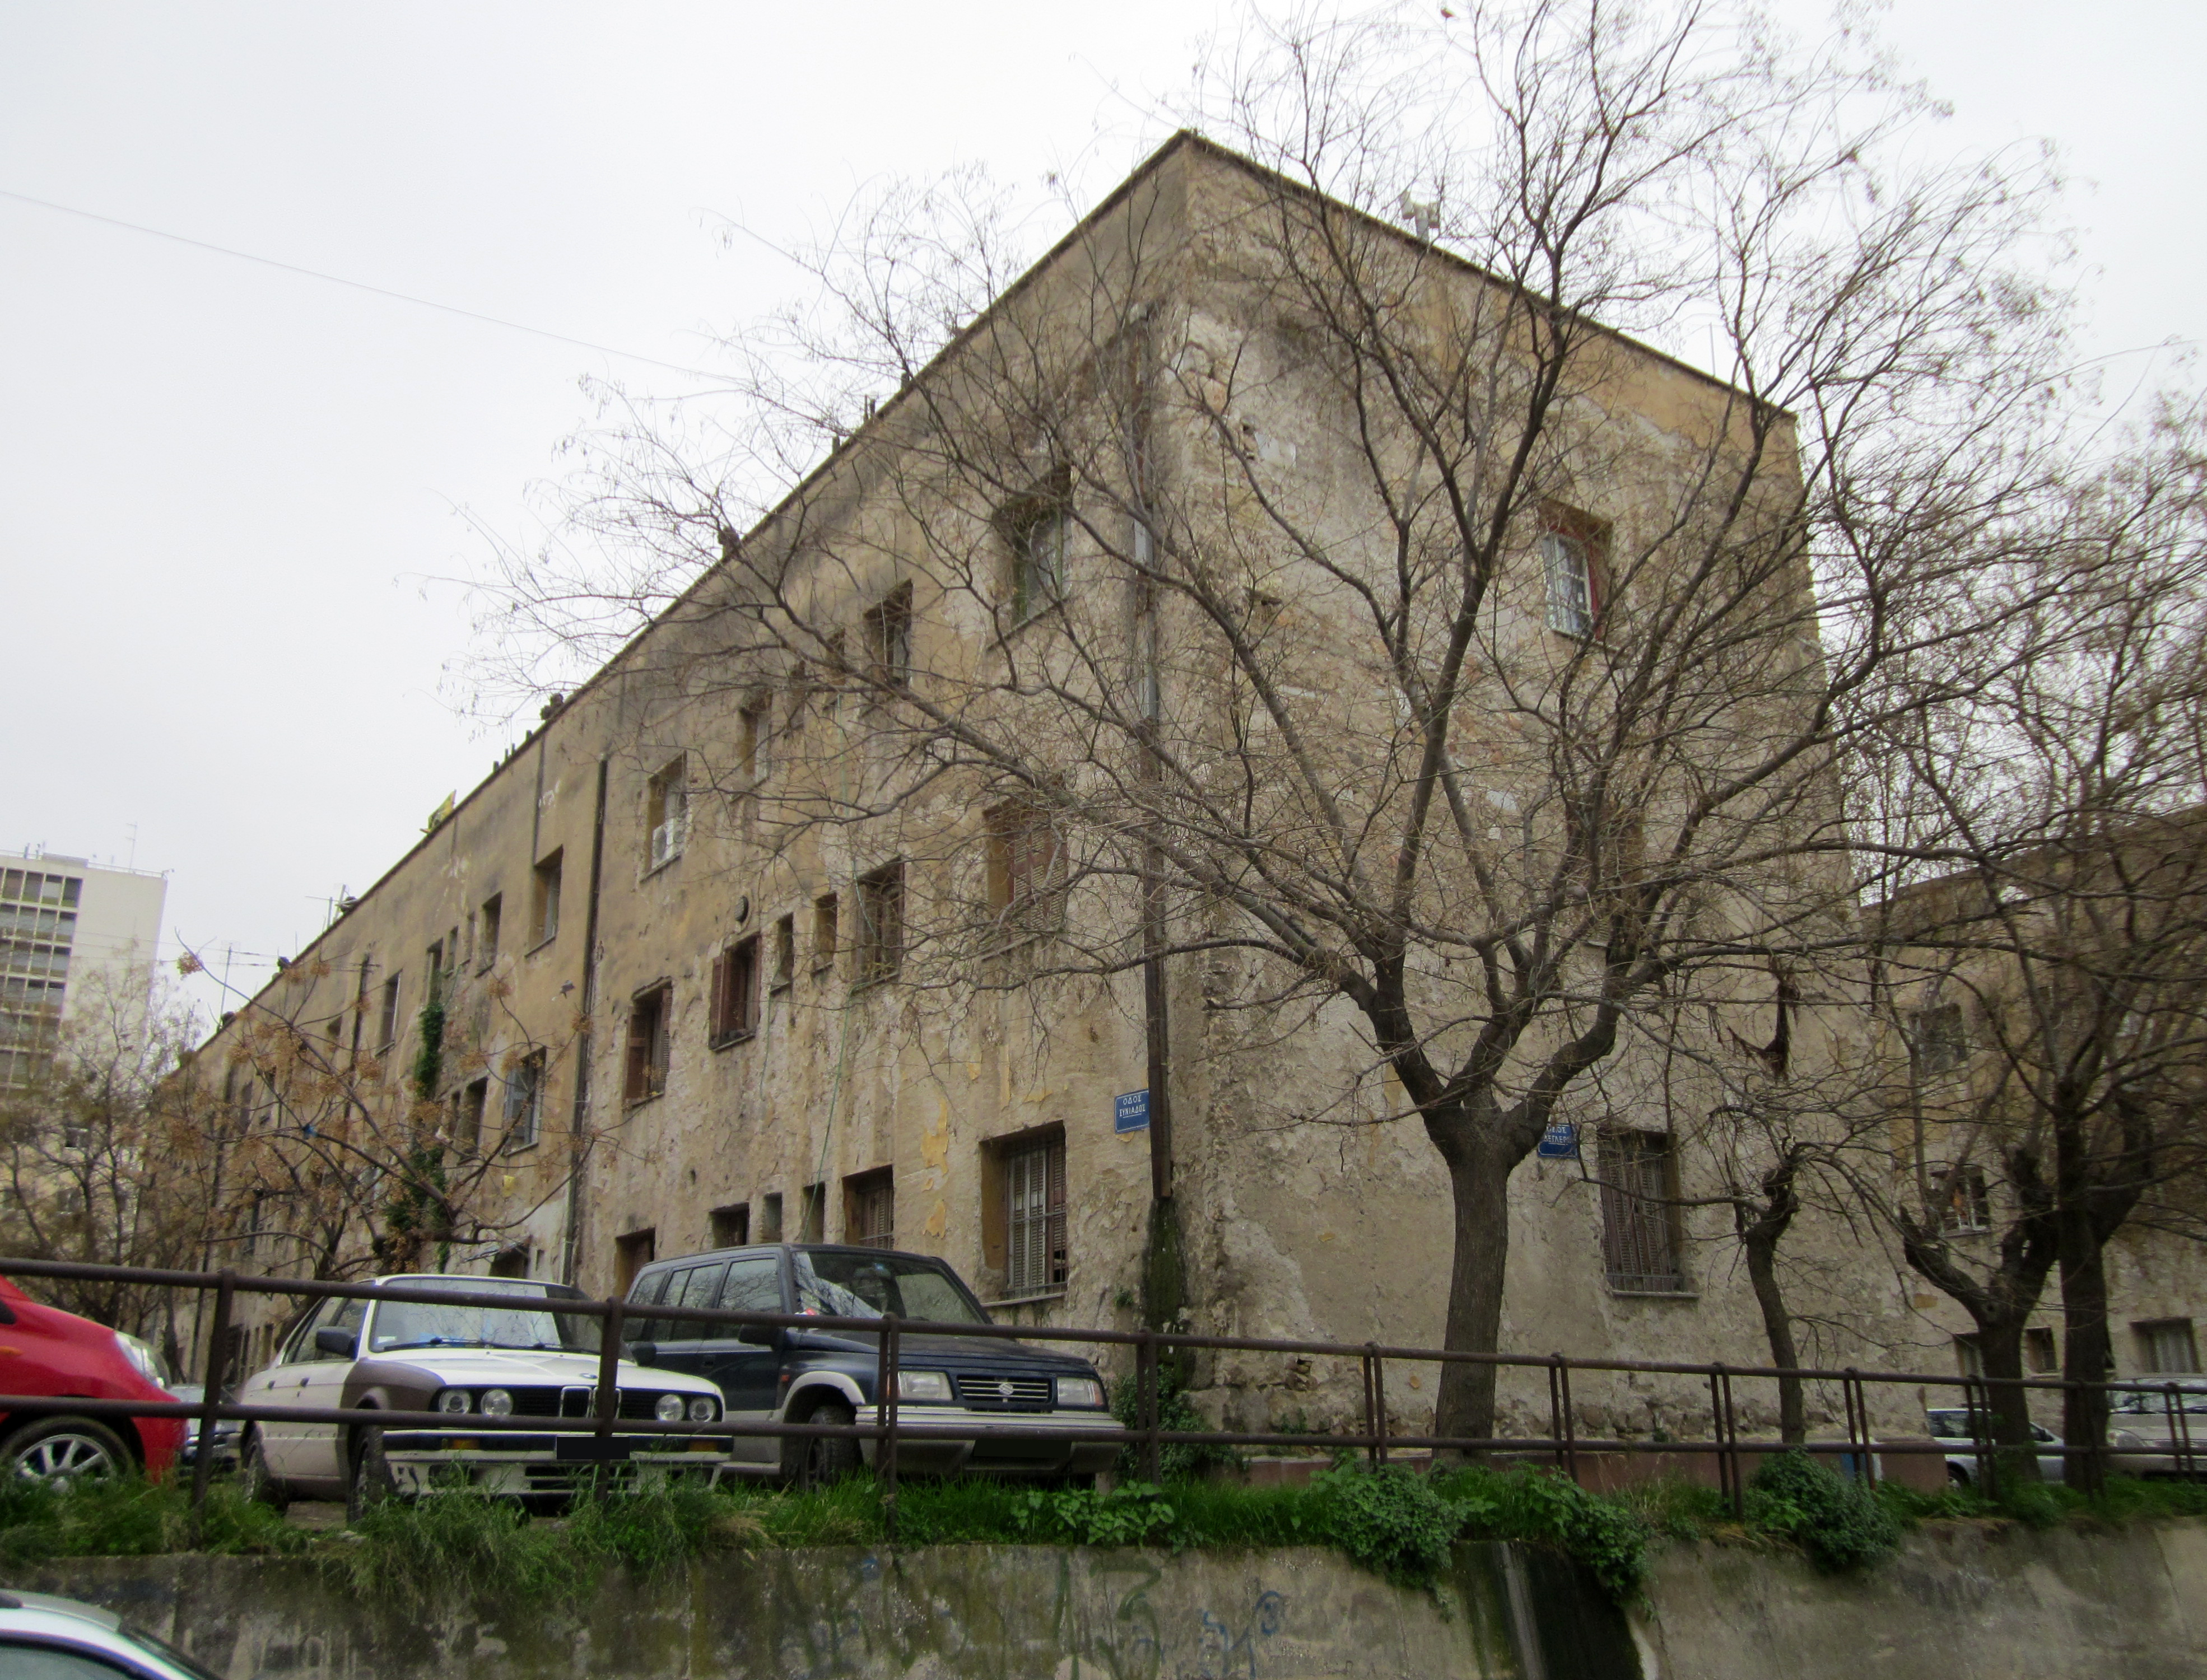 General view of the building